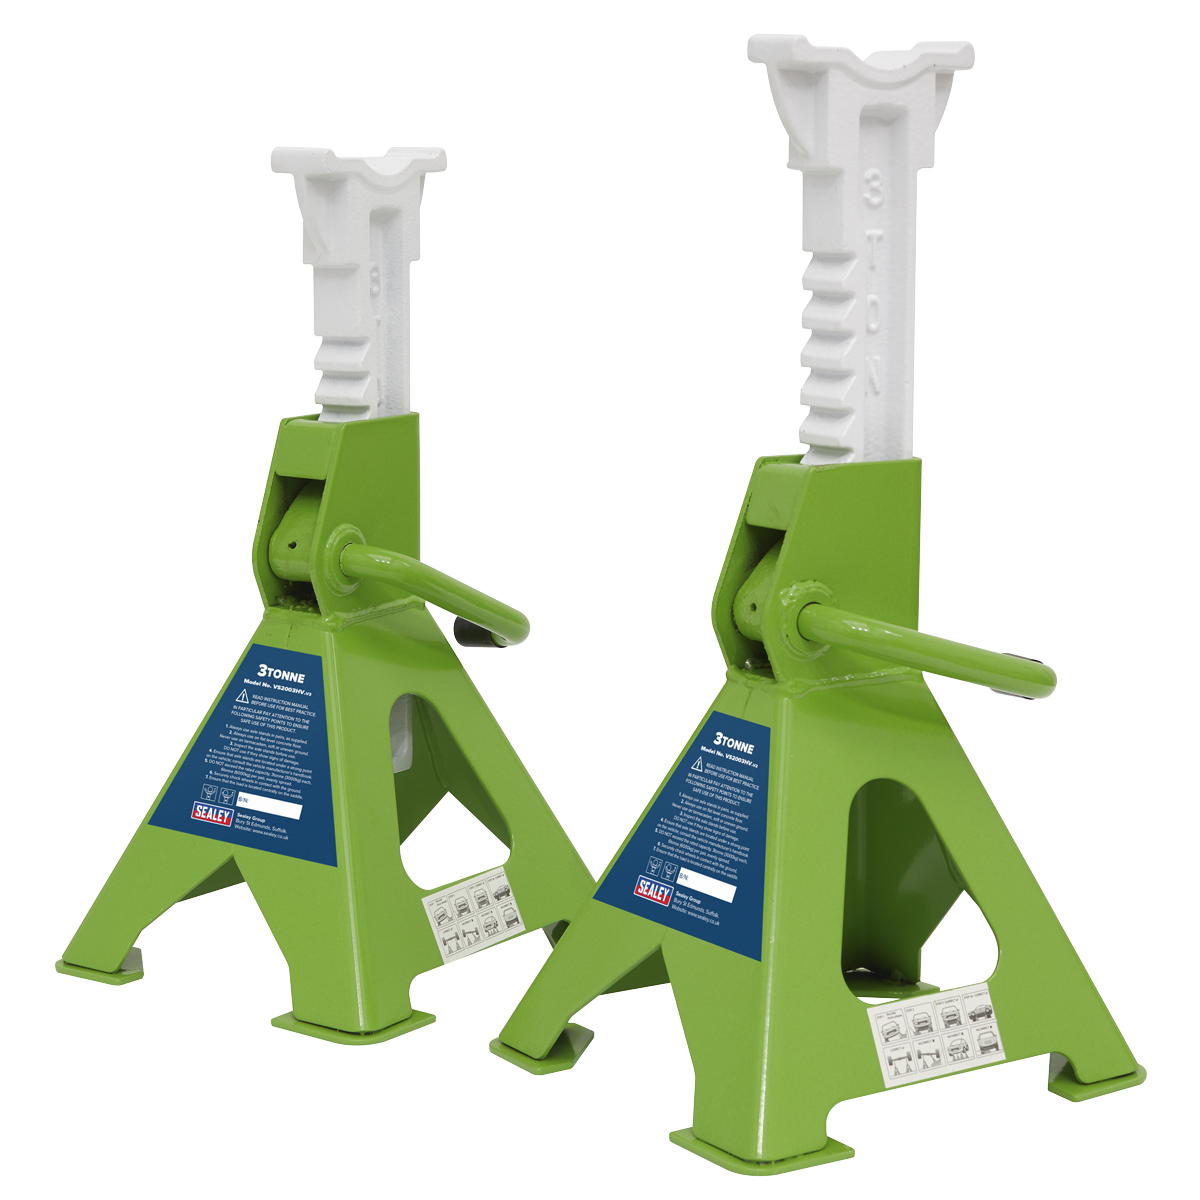 Sealey VS2003HV Axle Stands (Pair) 3 Tonne Capacity per Stand Ratchet Type - Hi-Vis Green